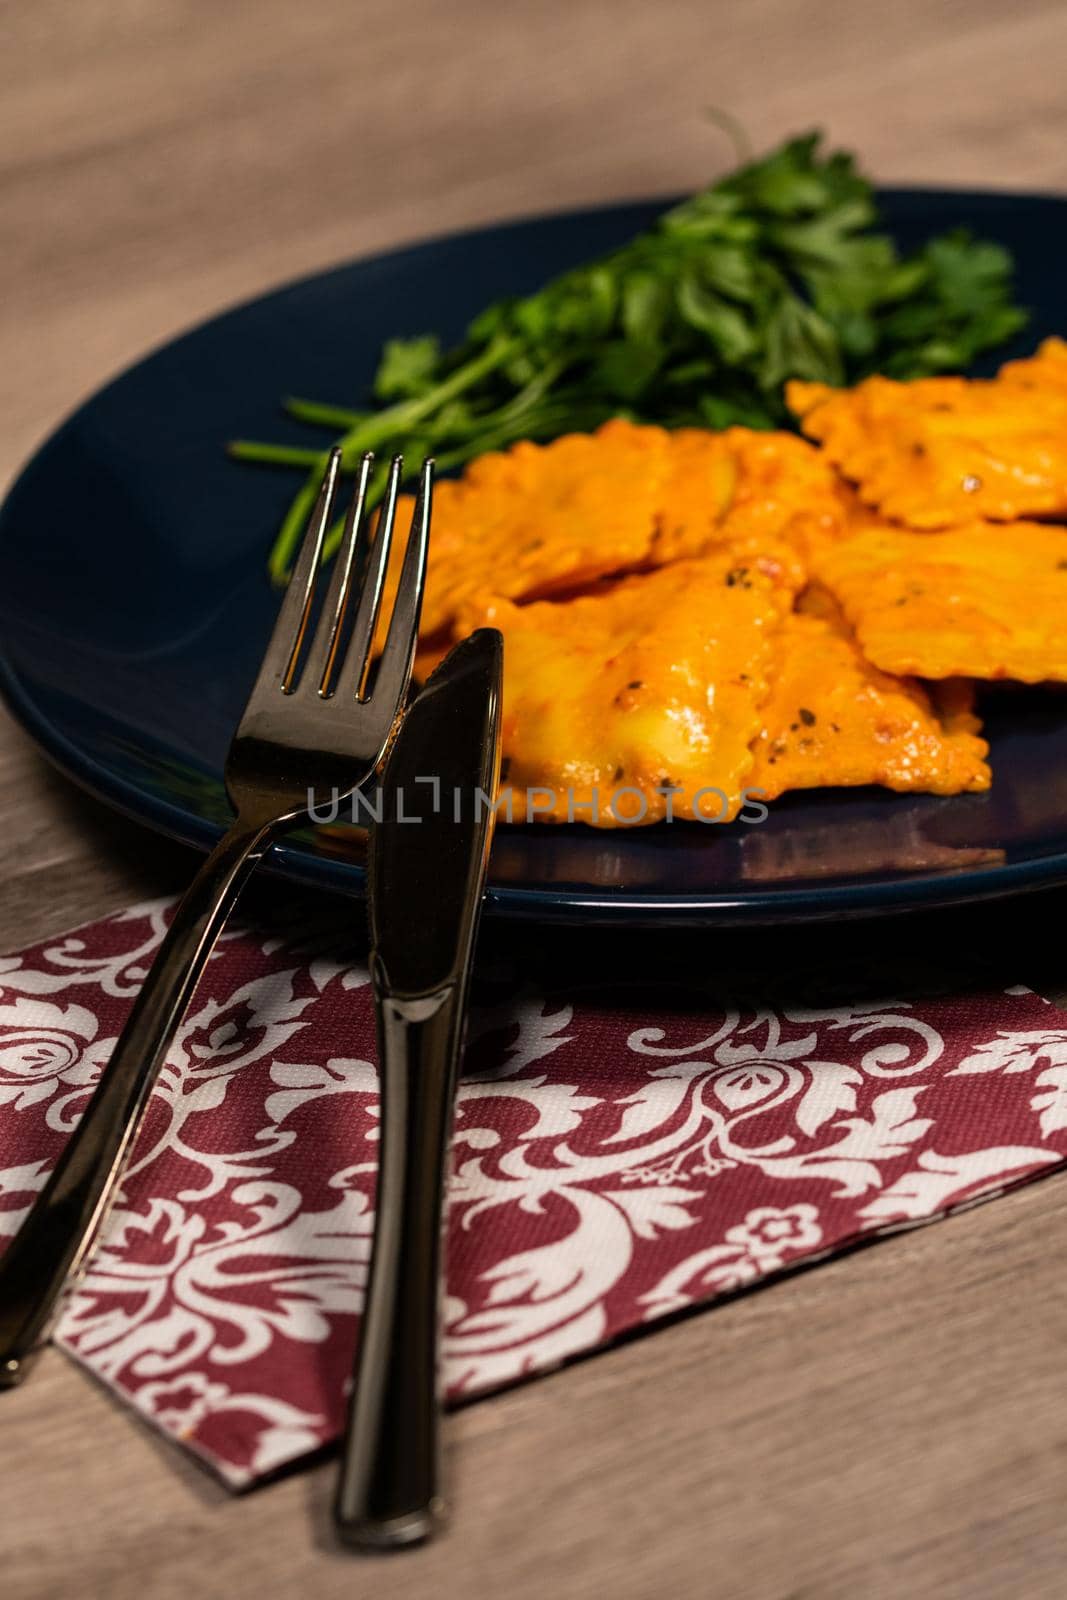 cutlery placed on a plate of ravioli by carfedeph